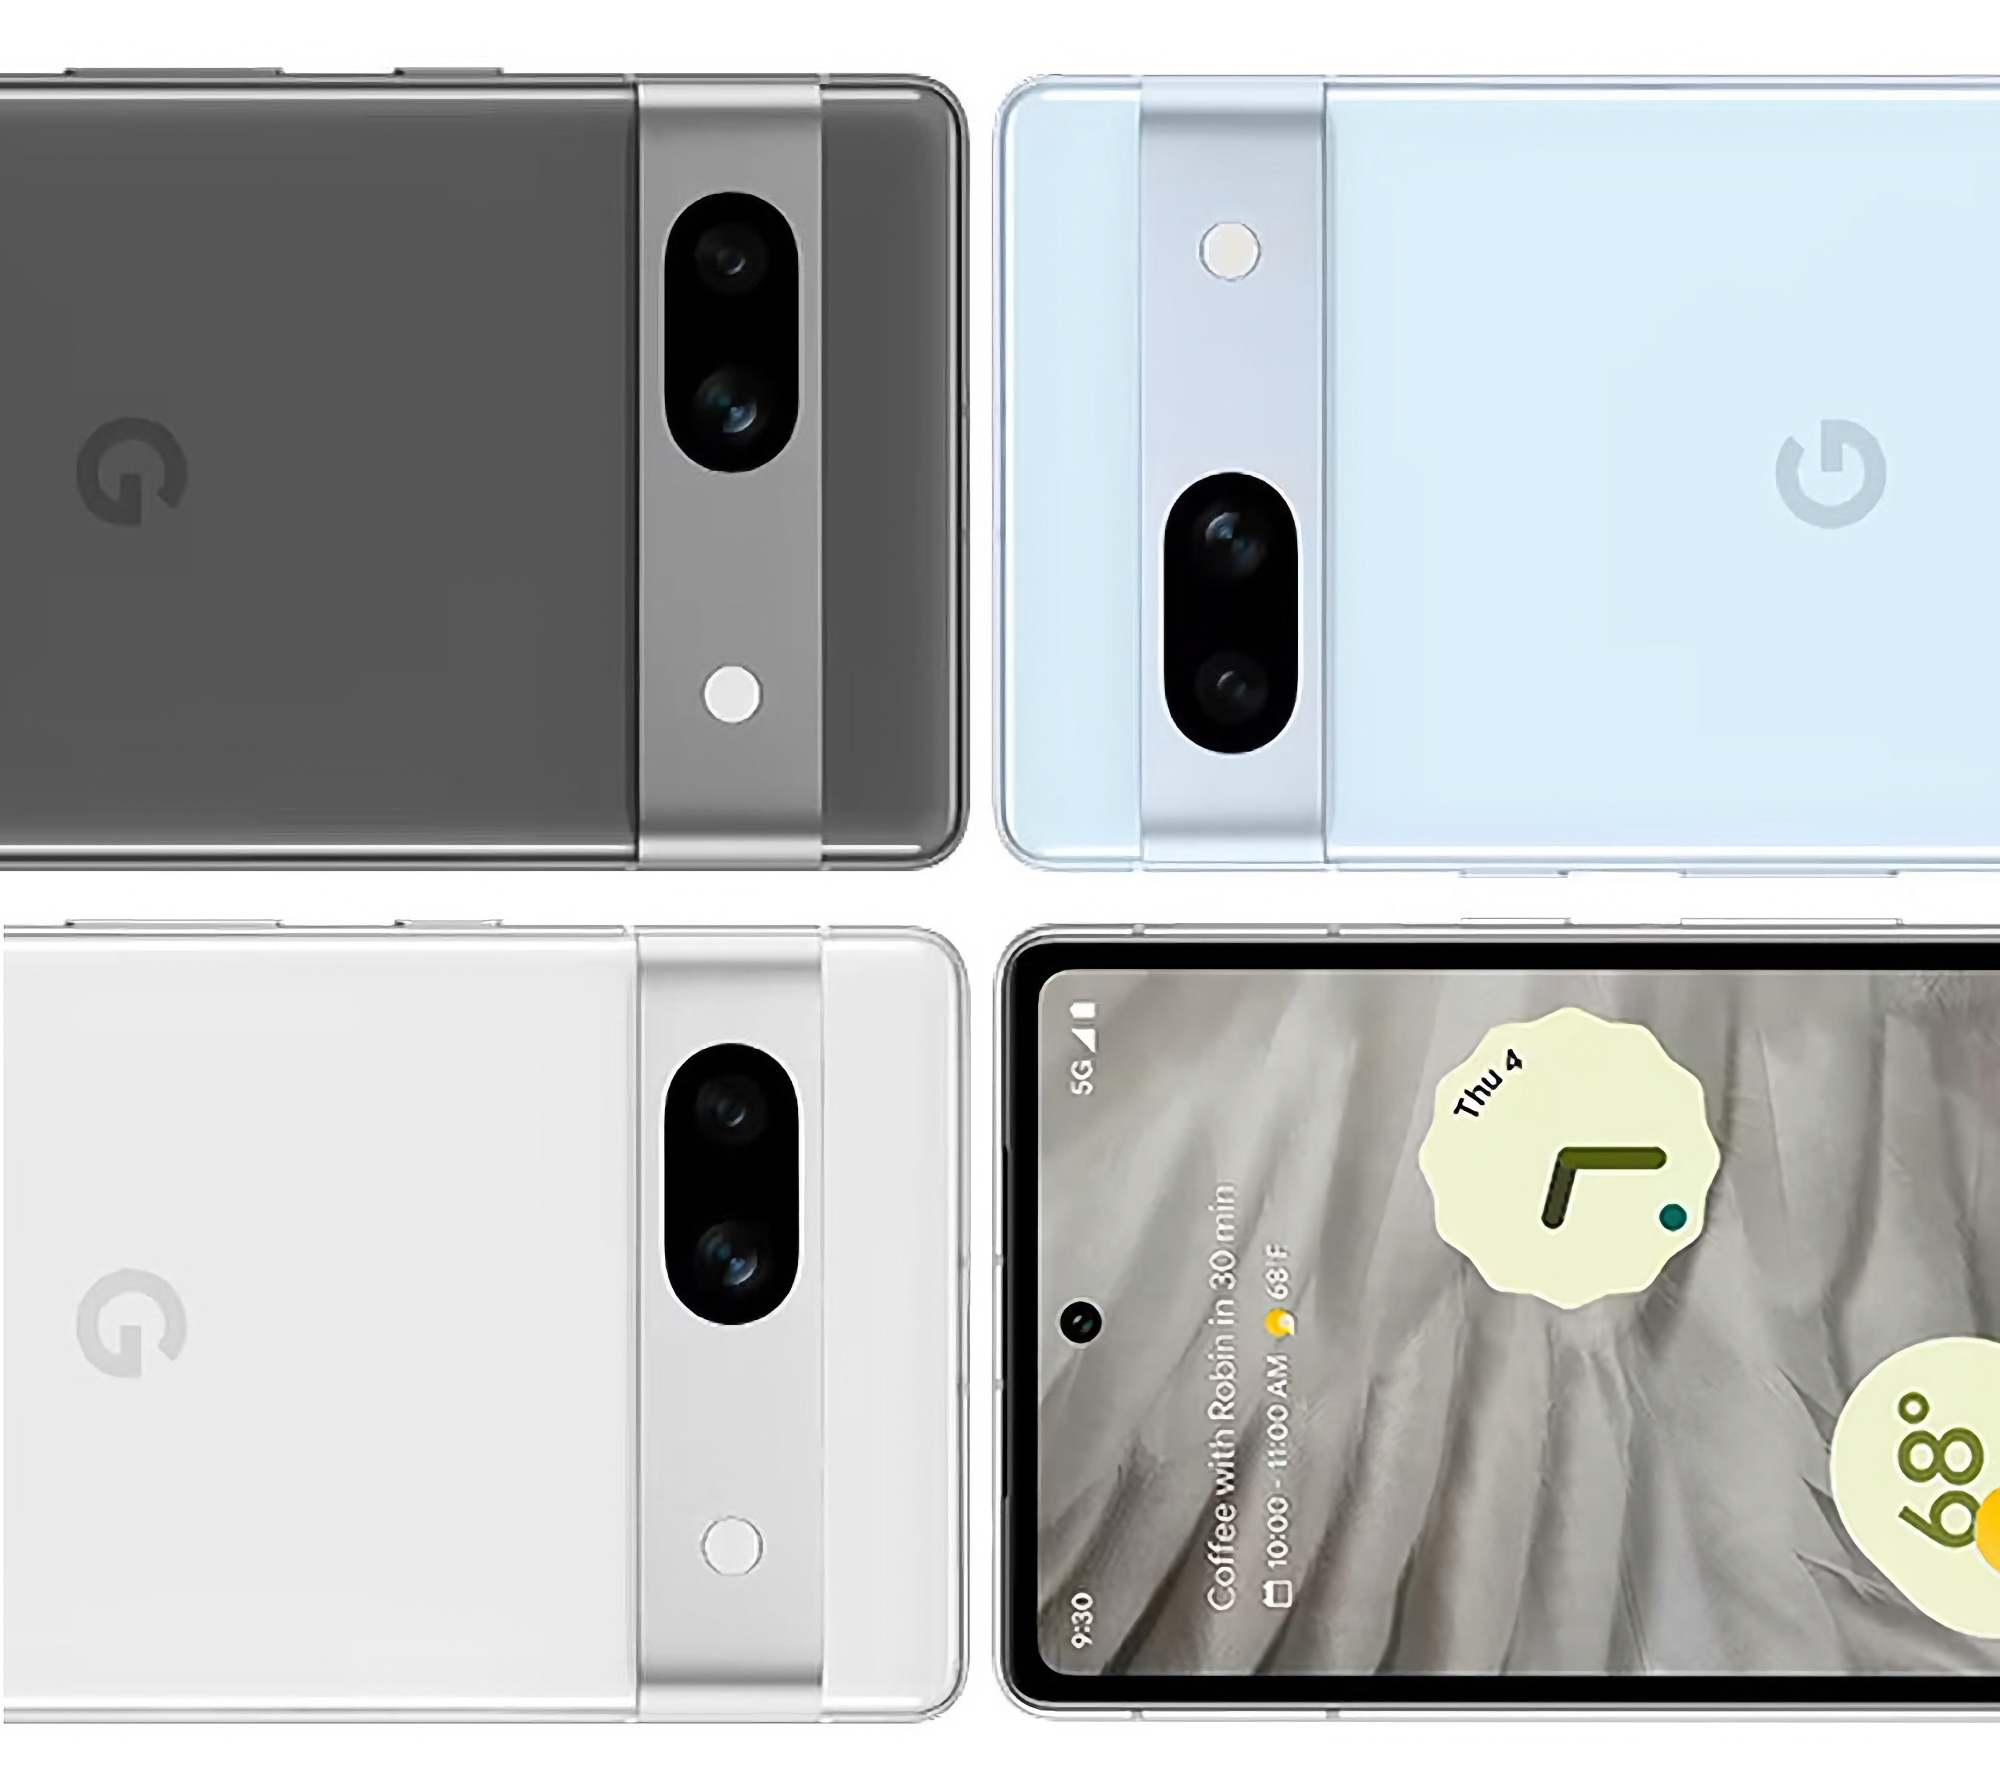 Confirmed: Google Pixel 7a will get Tensor G2 chip, wireless charging, 90Hz display and 64MP camera